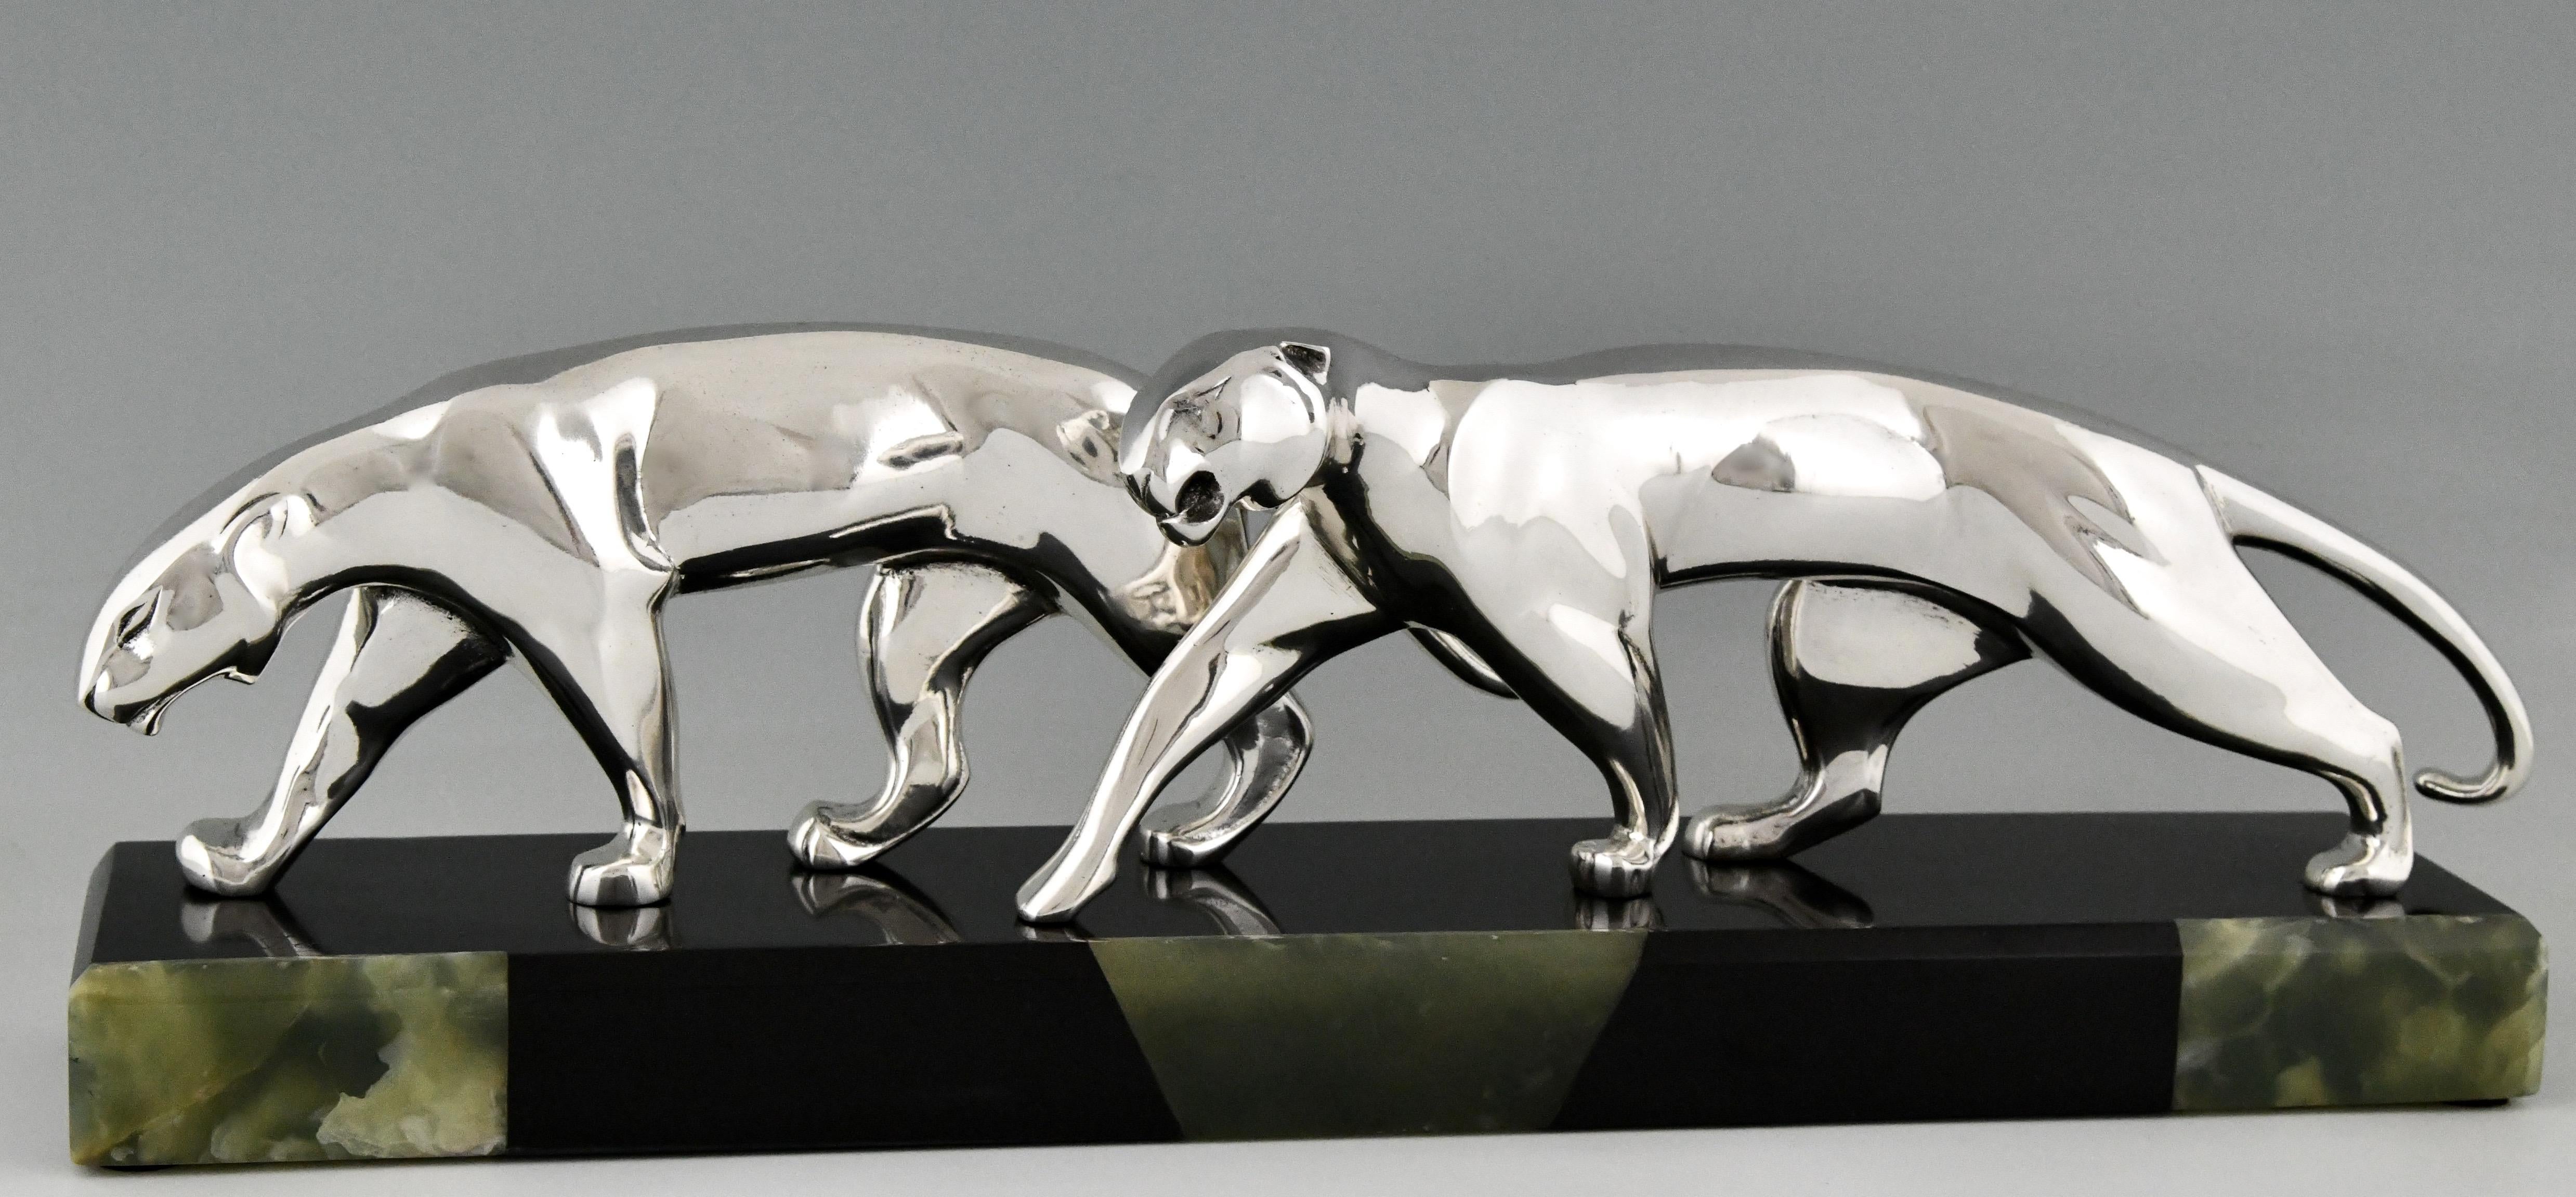 Art Deco silvered bronze sculpture two panthers by Michel Decoux, France 1837-1924. The panther sculptures are mounted on a Belgian Black marble base with onyx inlay. France ca. 1920.